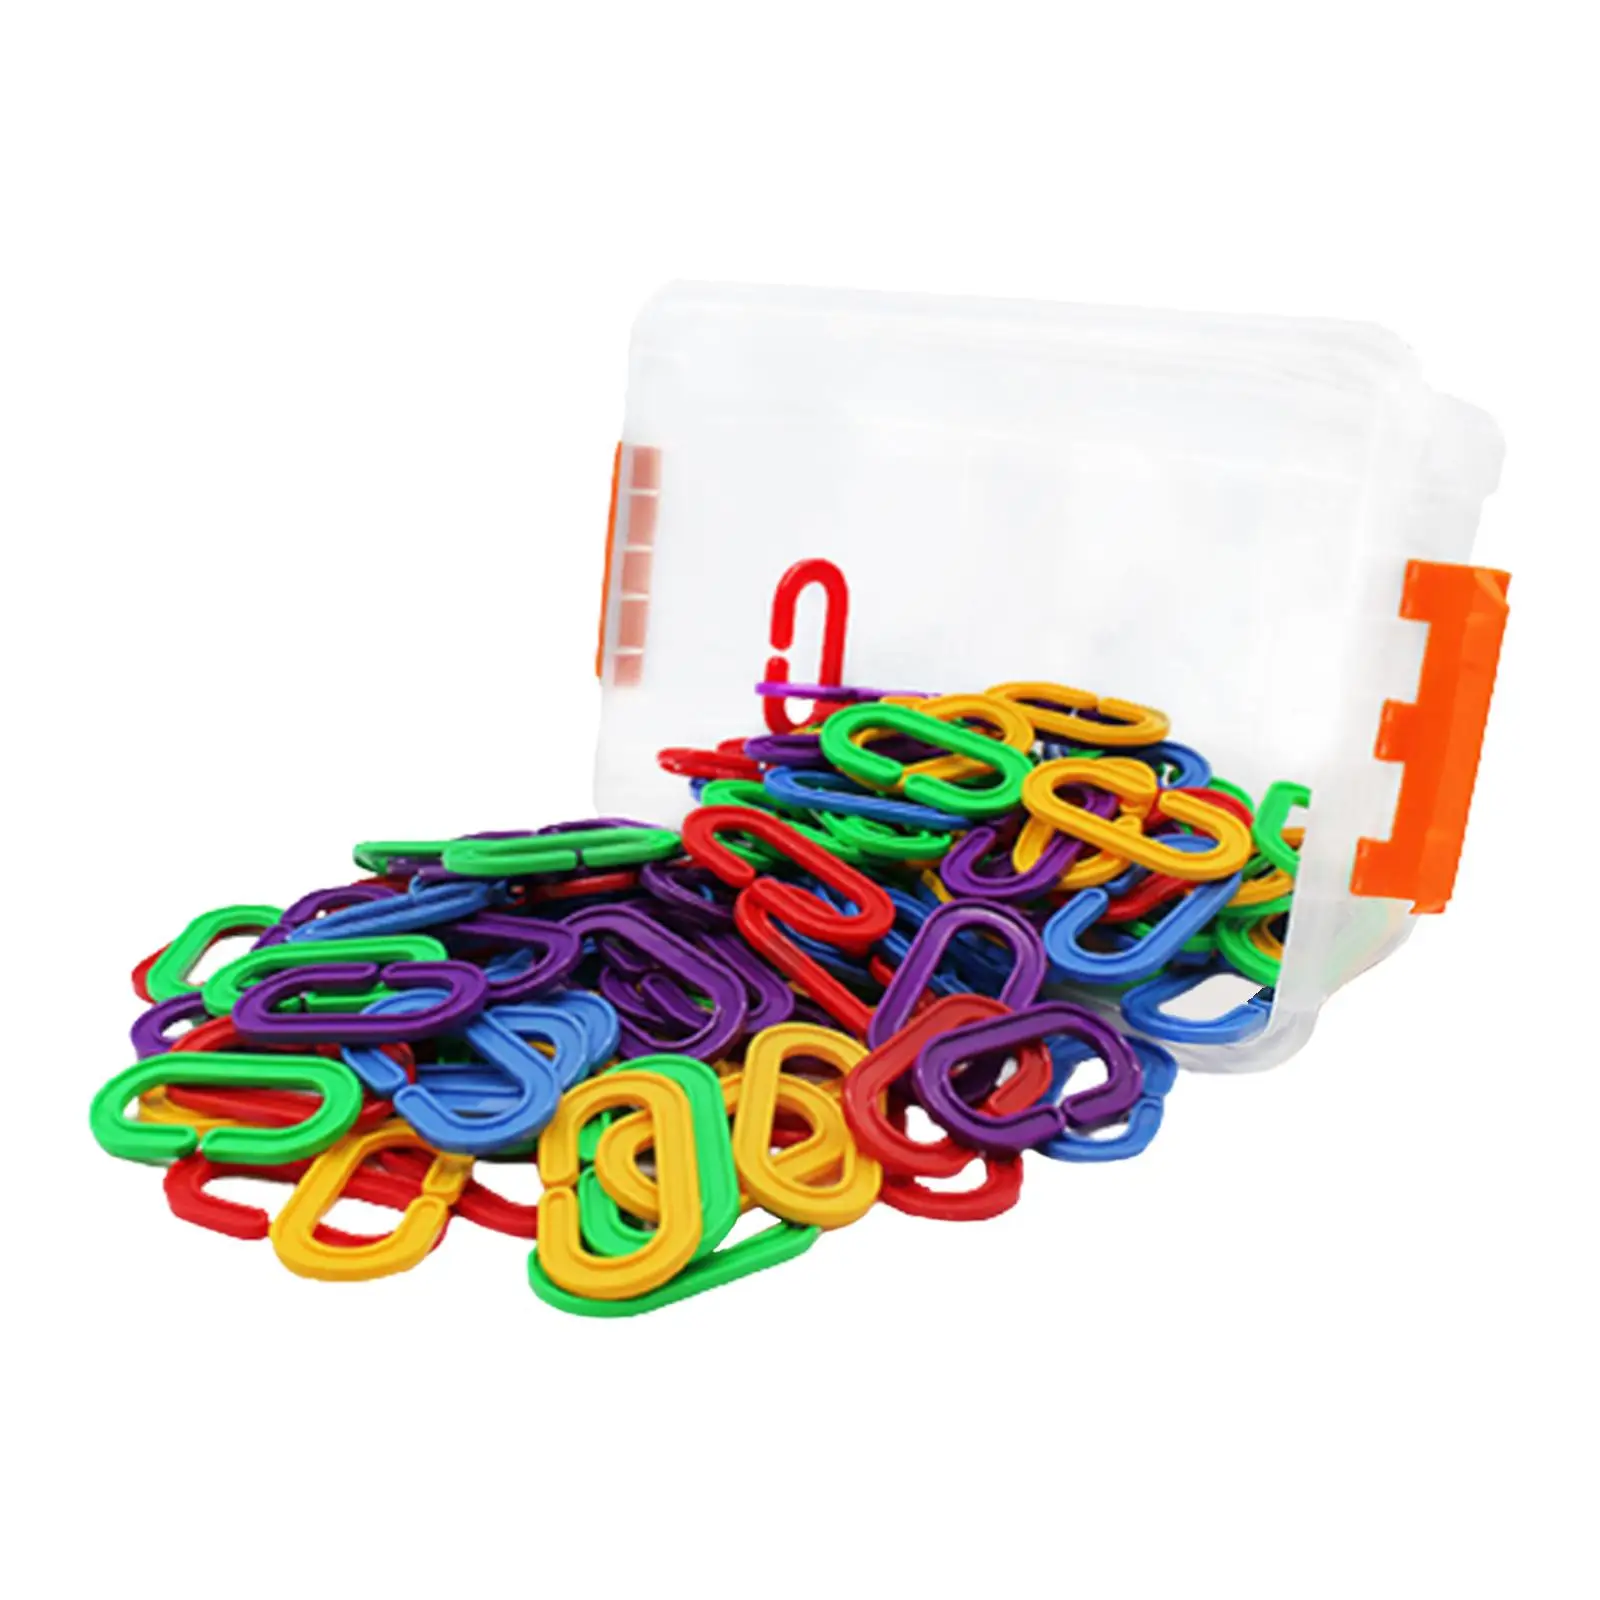 150Pcs Chain Links Counting and Sorting Colorful Links for Playroom